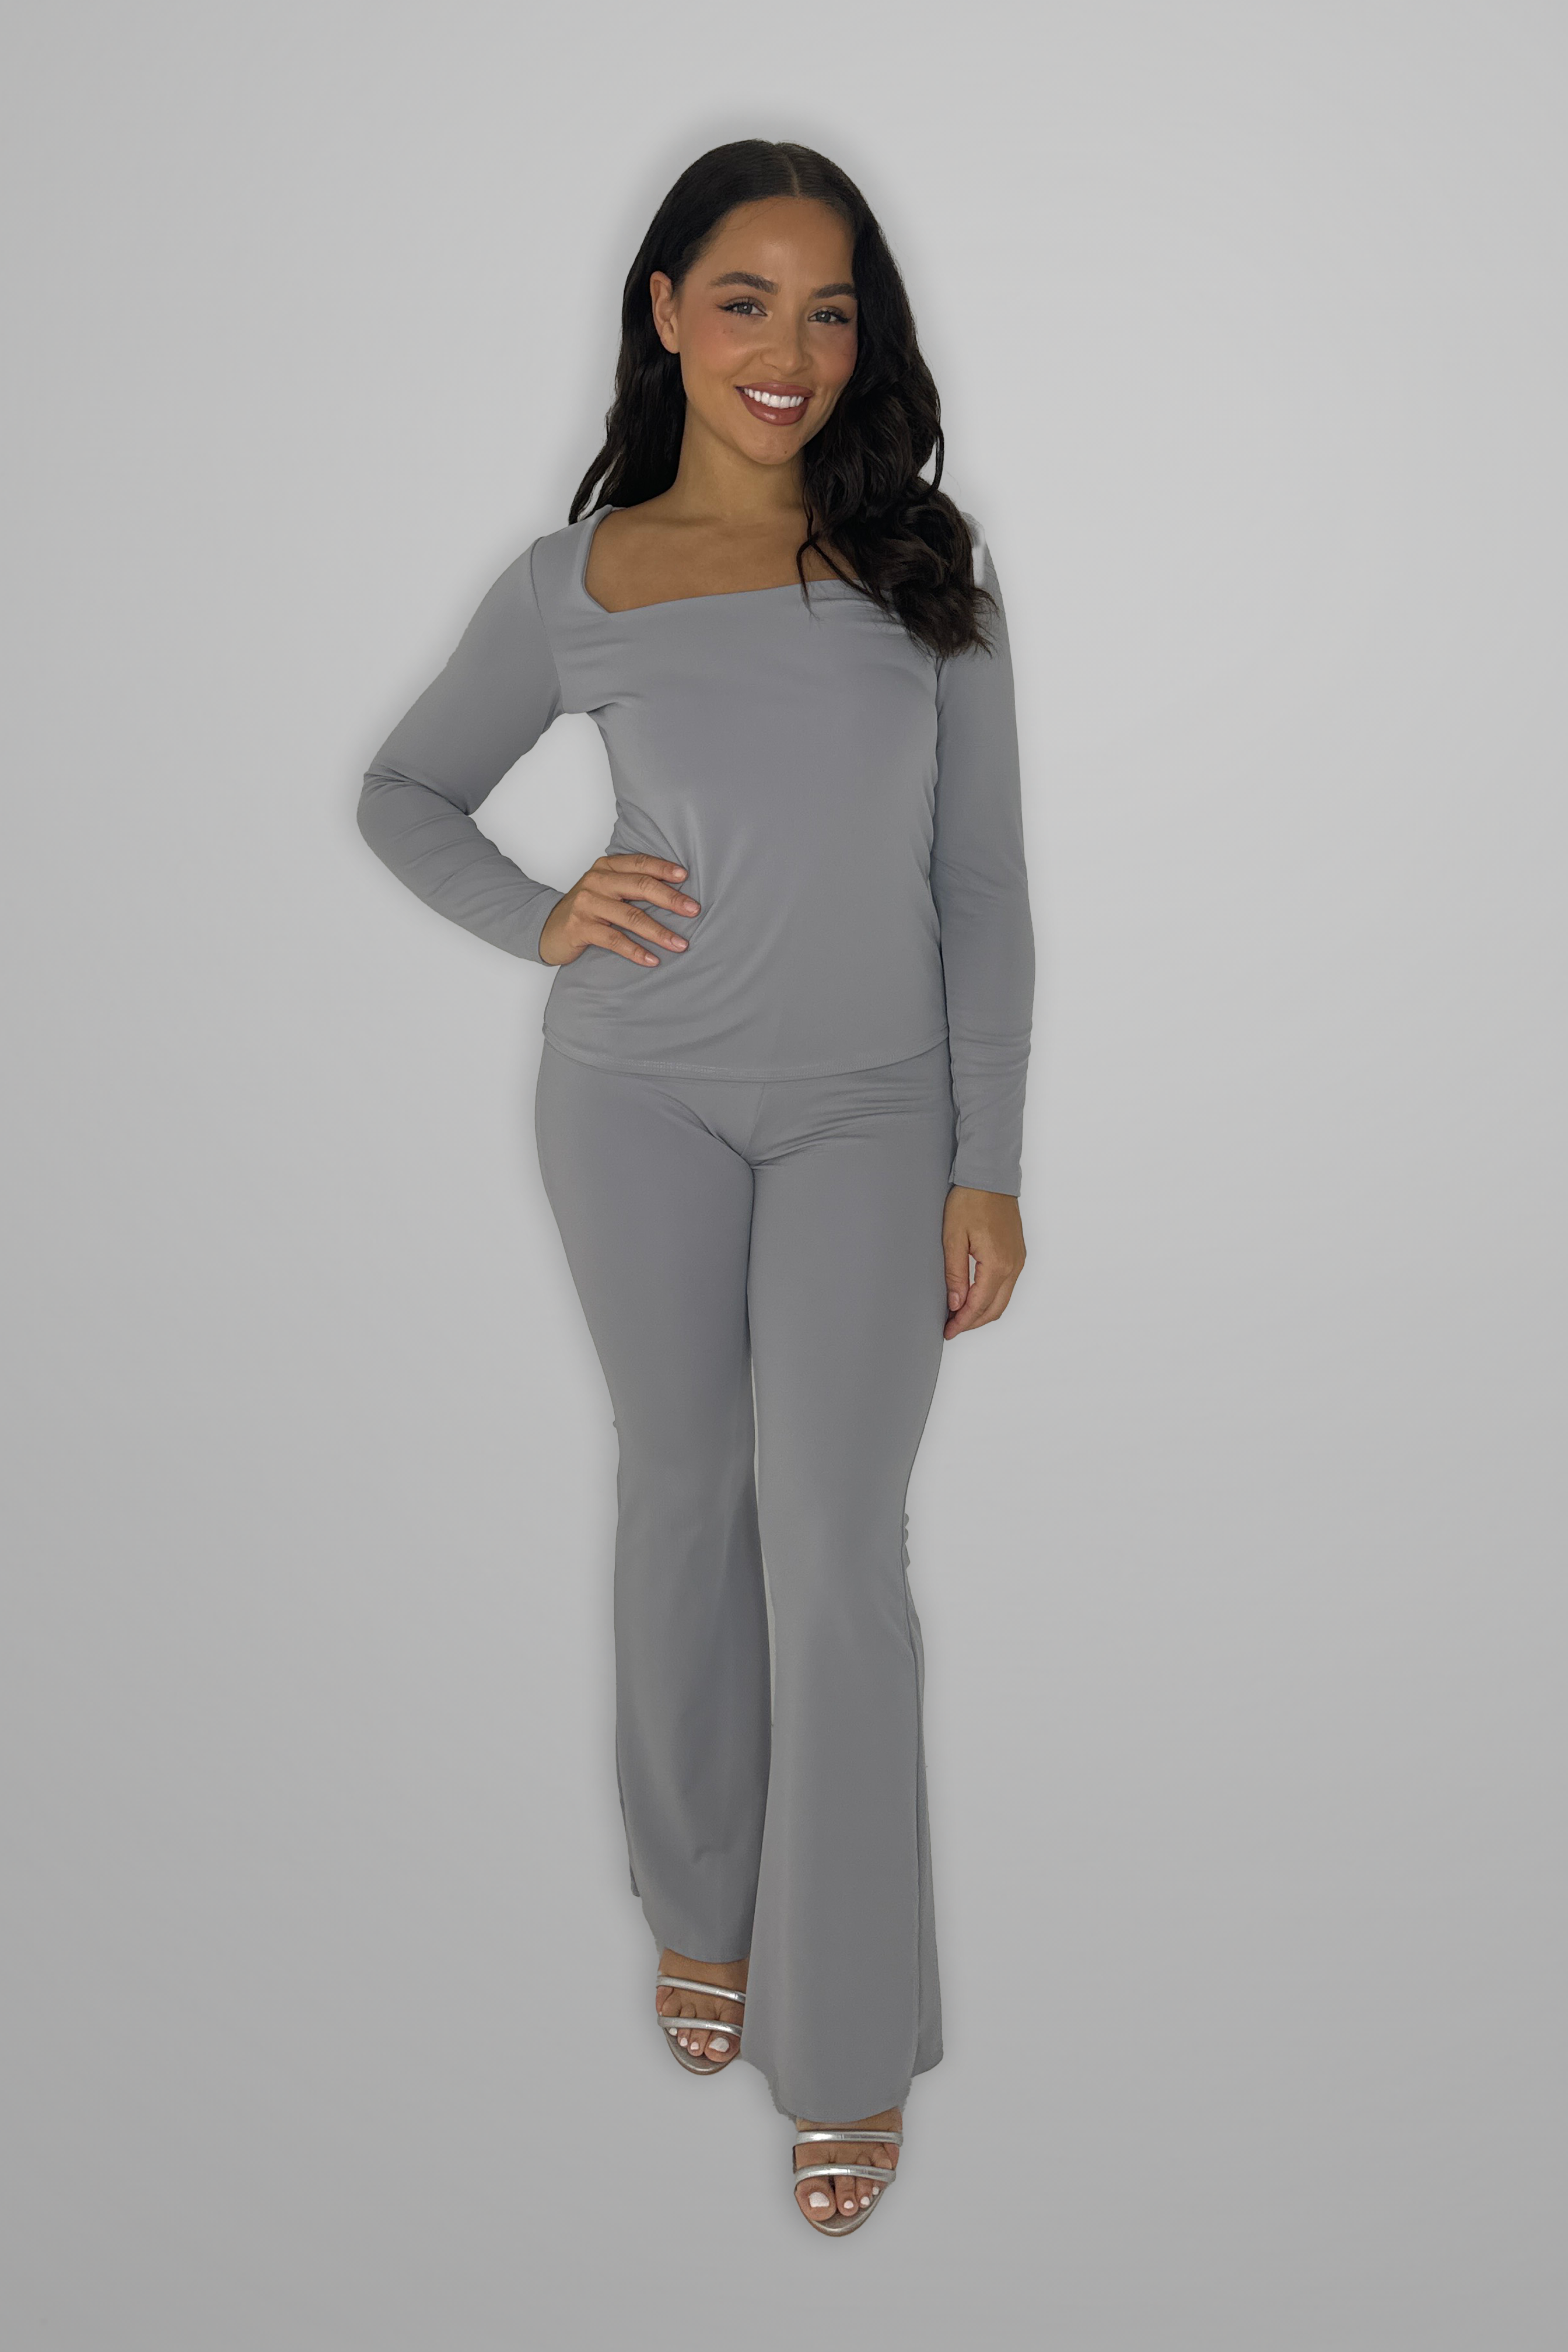 Square Neck Long Sleeve Top And Flare Leg Co-ord Set